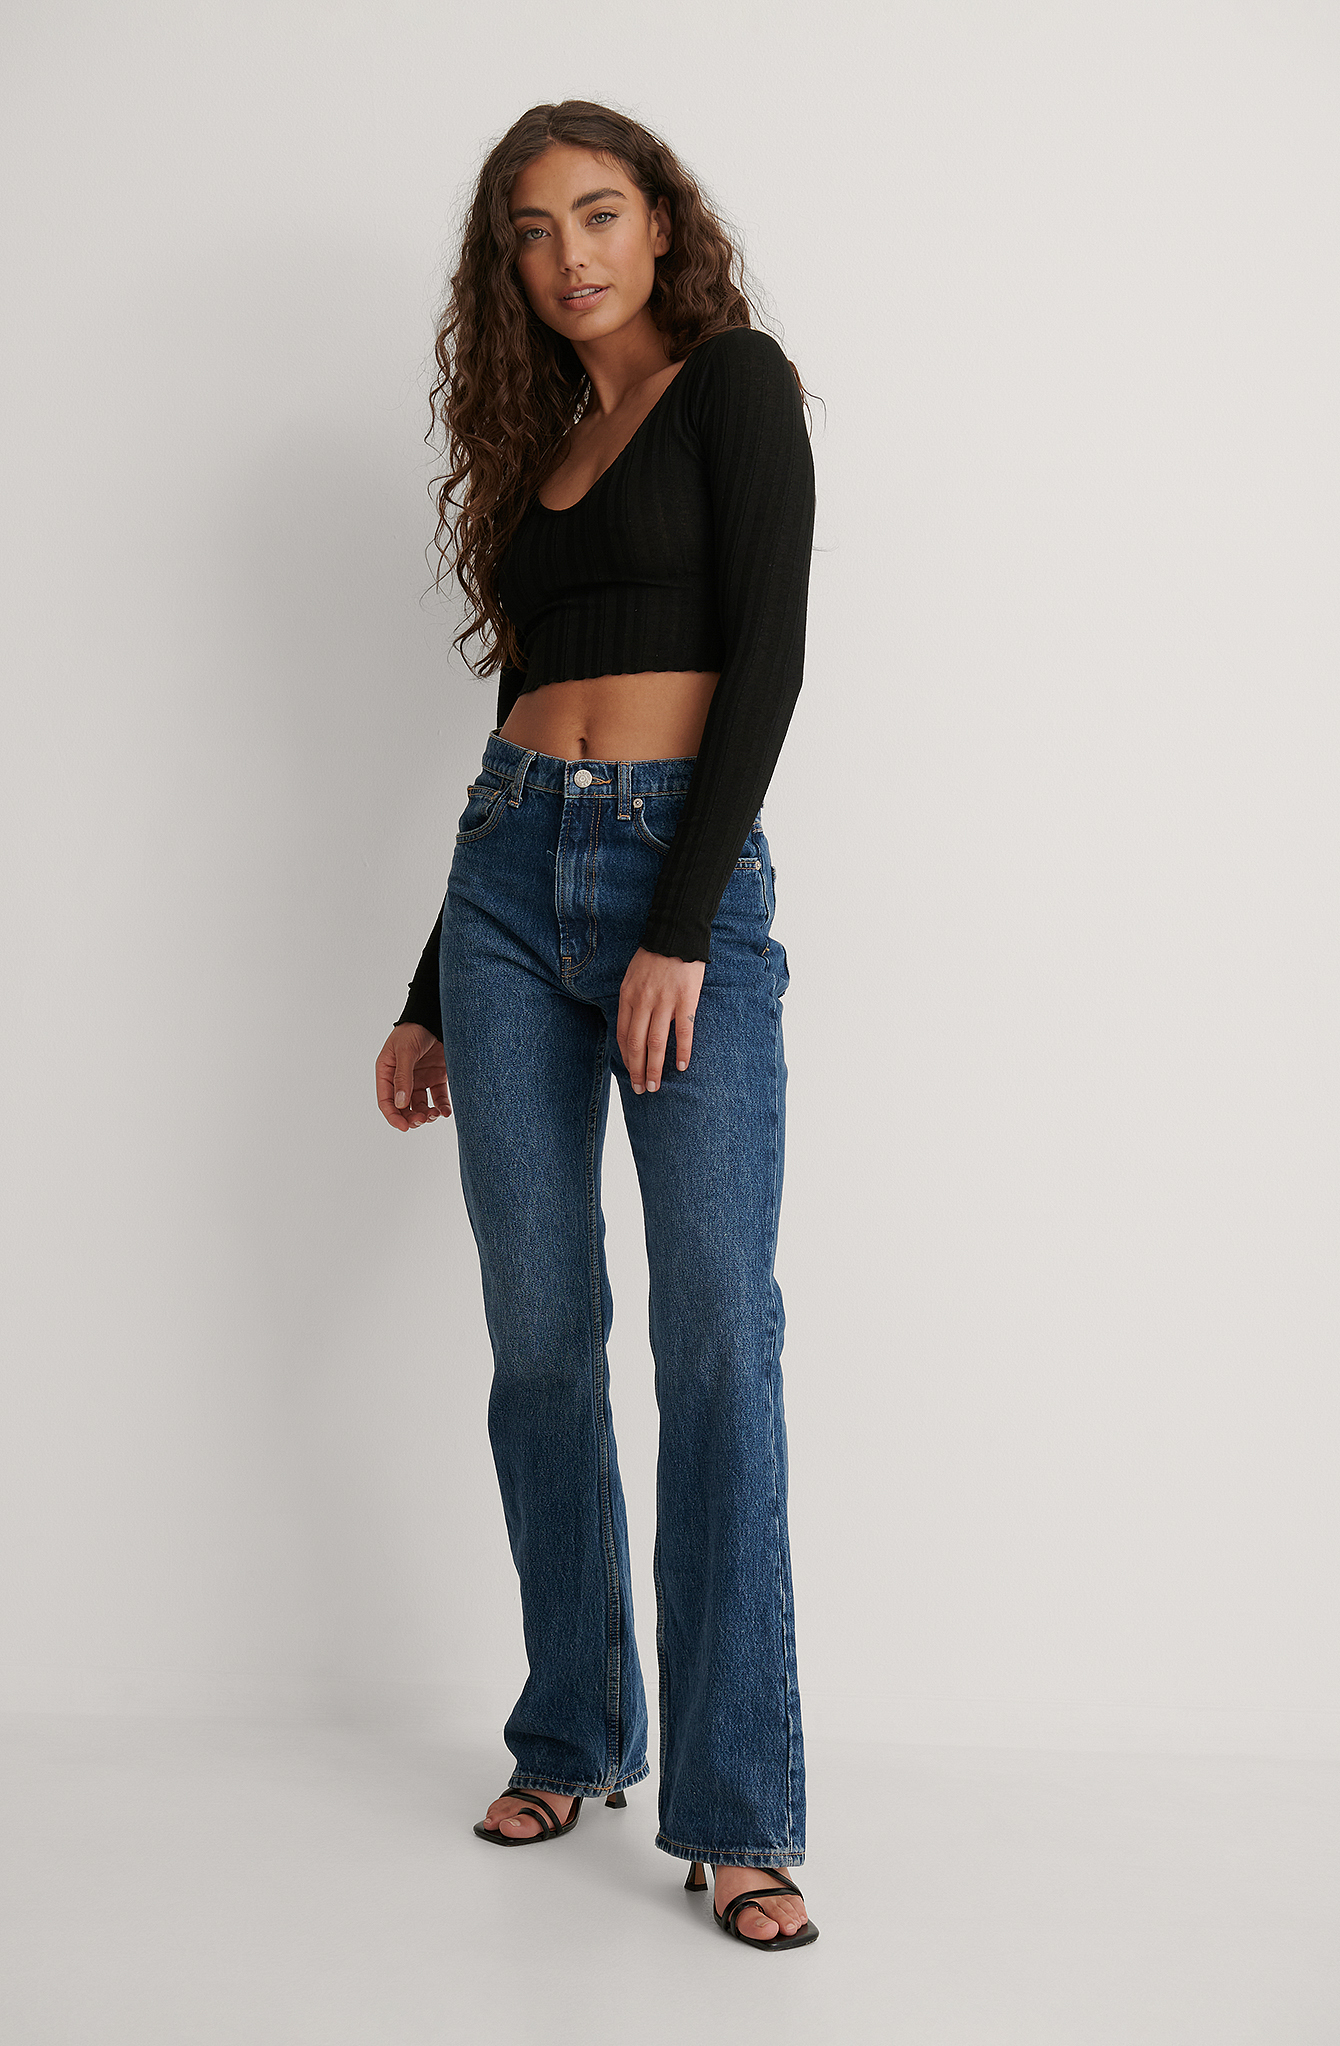 V-neck Crop Rib Top Outfit